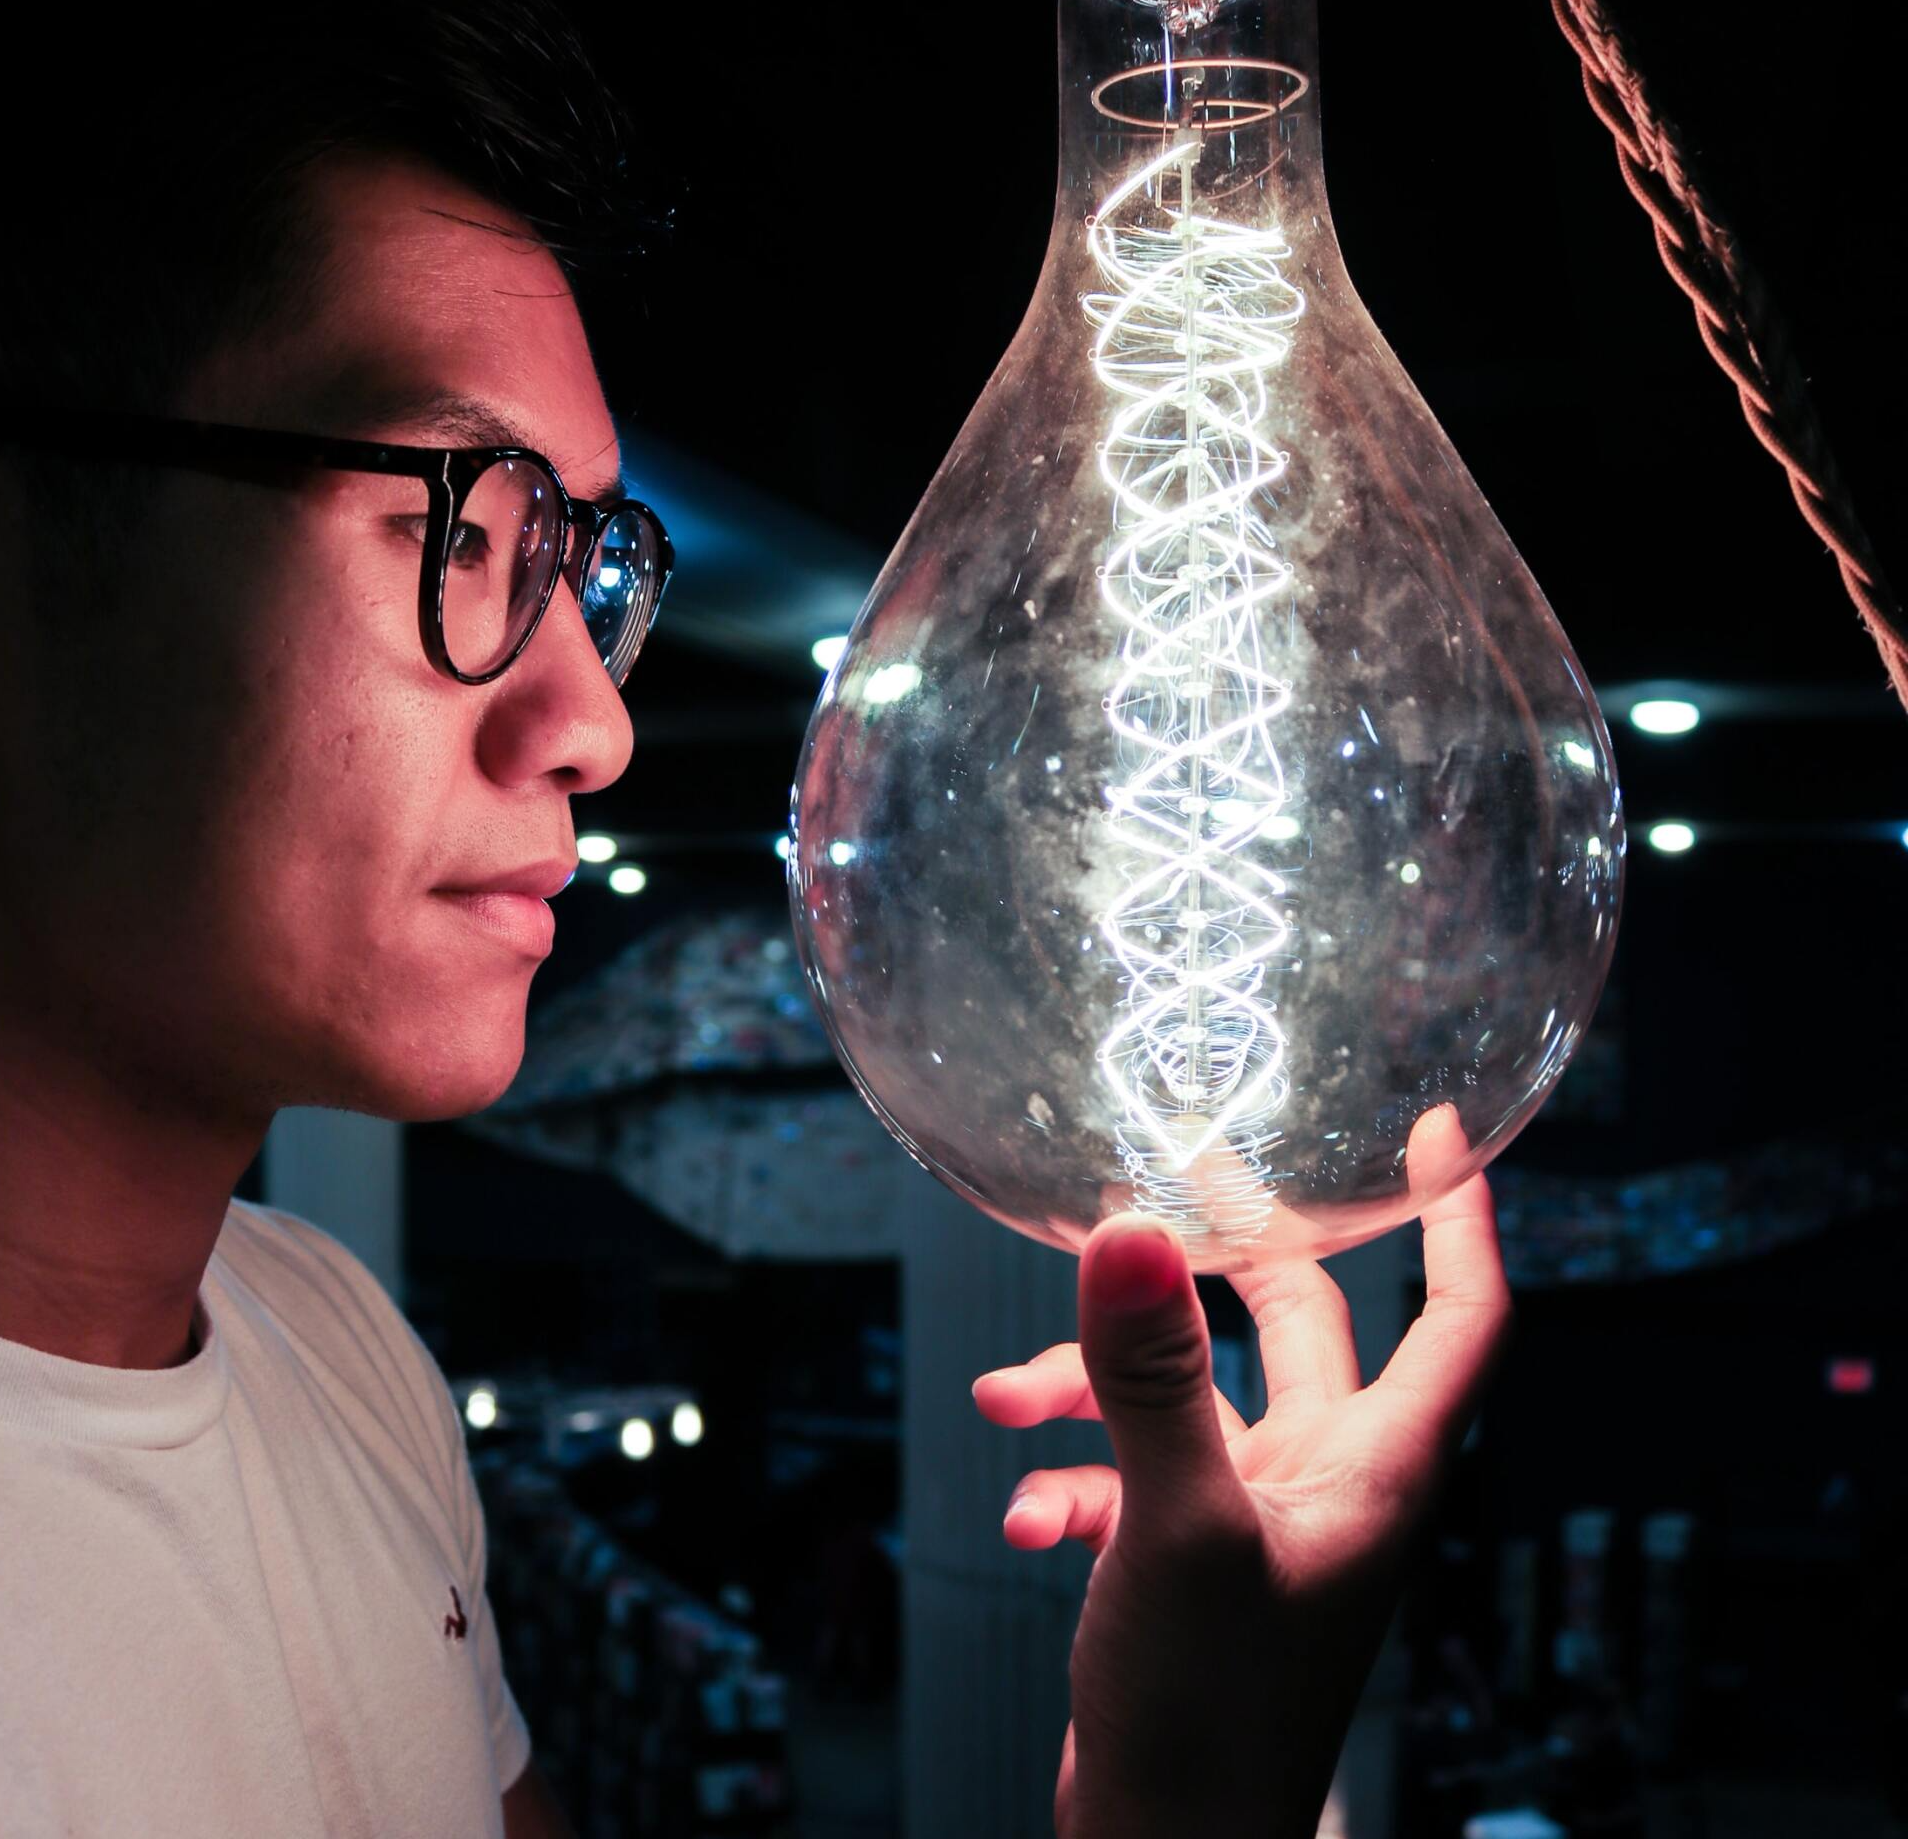 A man wearing glasses is holding a light bulb in his hand